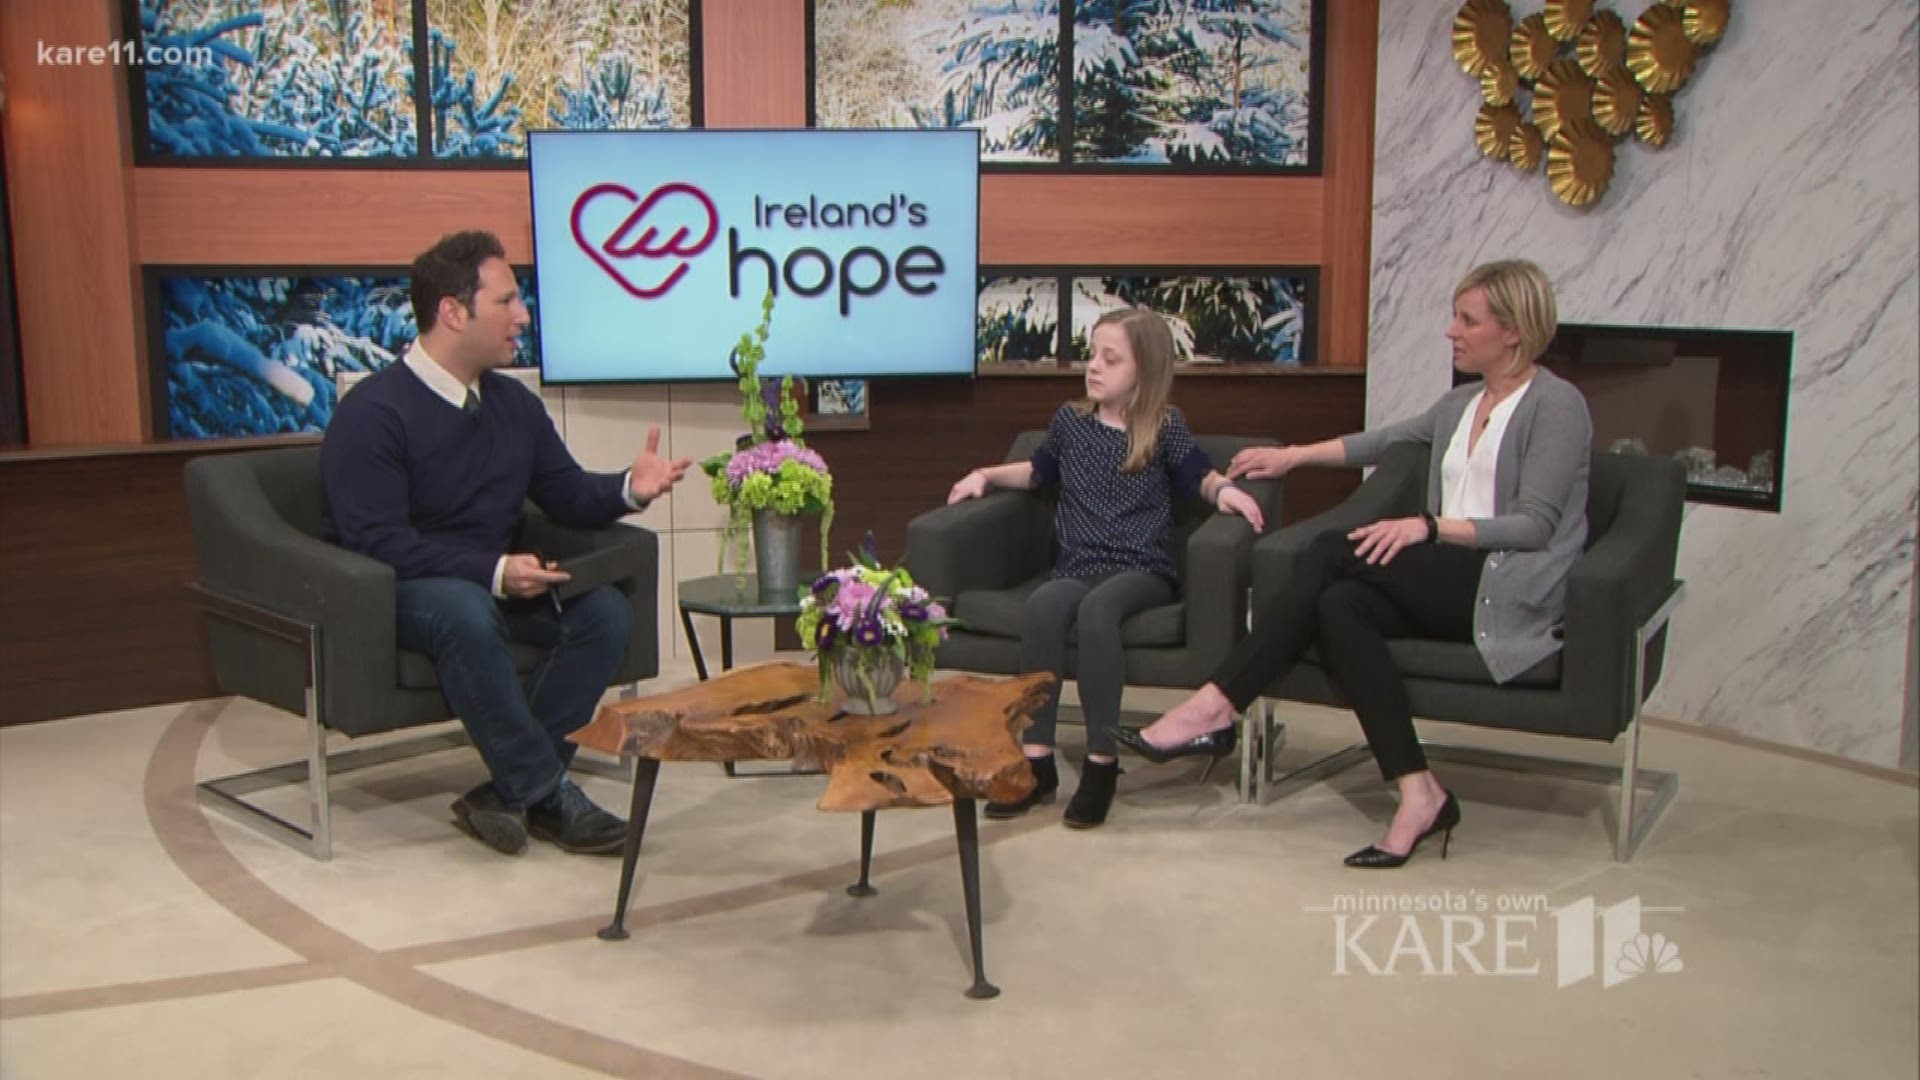 Dave catches up with Ireland Larson, who after her own transplant, inspired the foundation Ireland's Hope, that helps fund expenses for families of children going through transplants. She tells us about the Be The Hope Gala coming up on April 26th that he